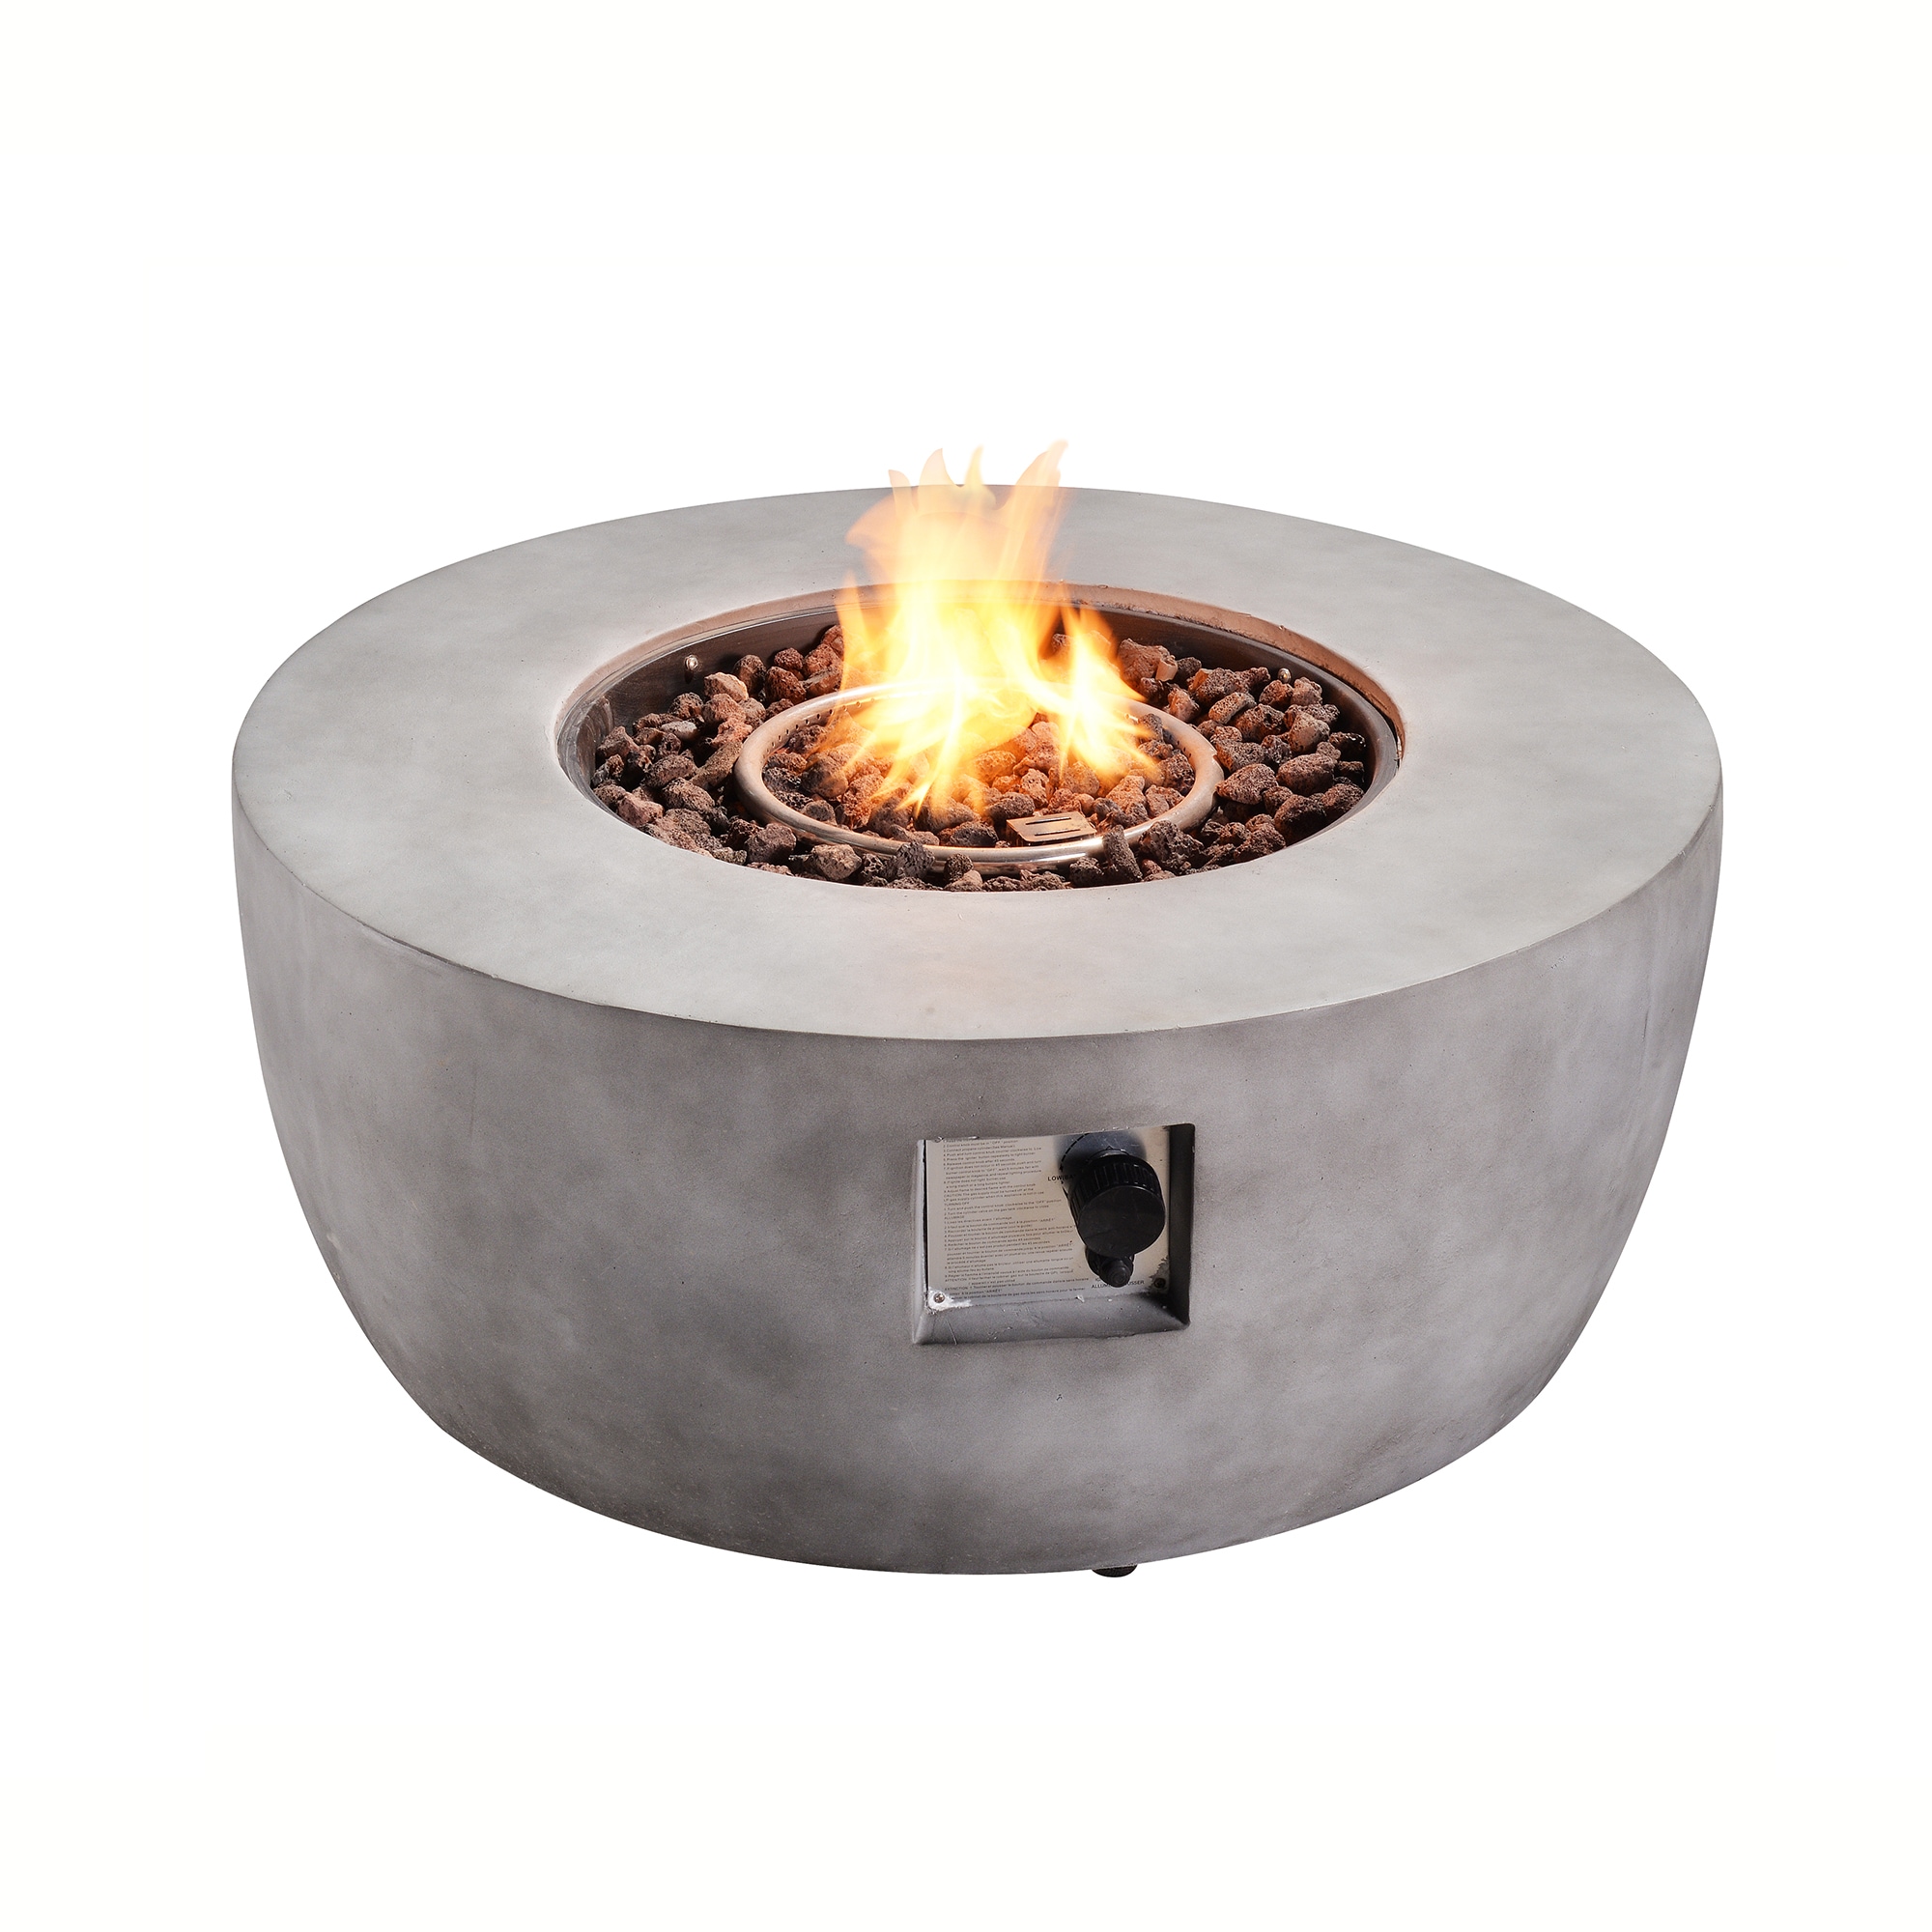 Concrete Propane Gas Fire Pit, Fire Pit Electronic Ignition System Car